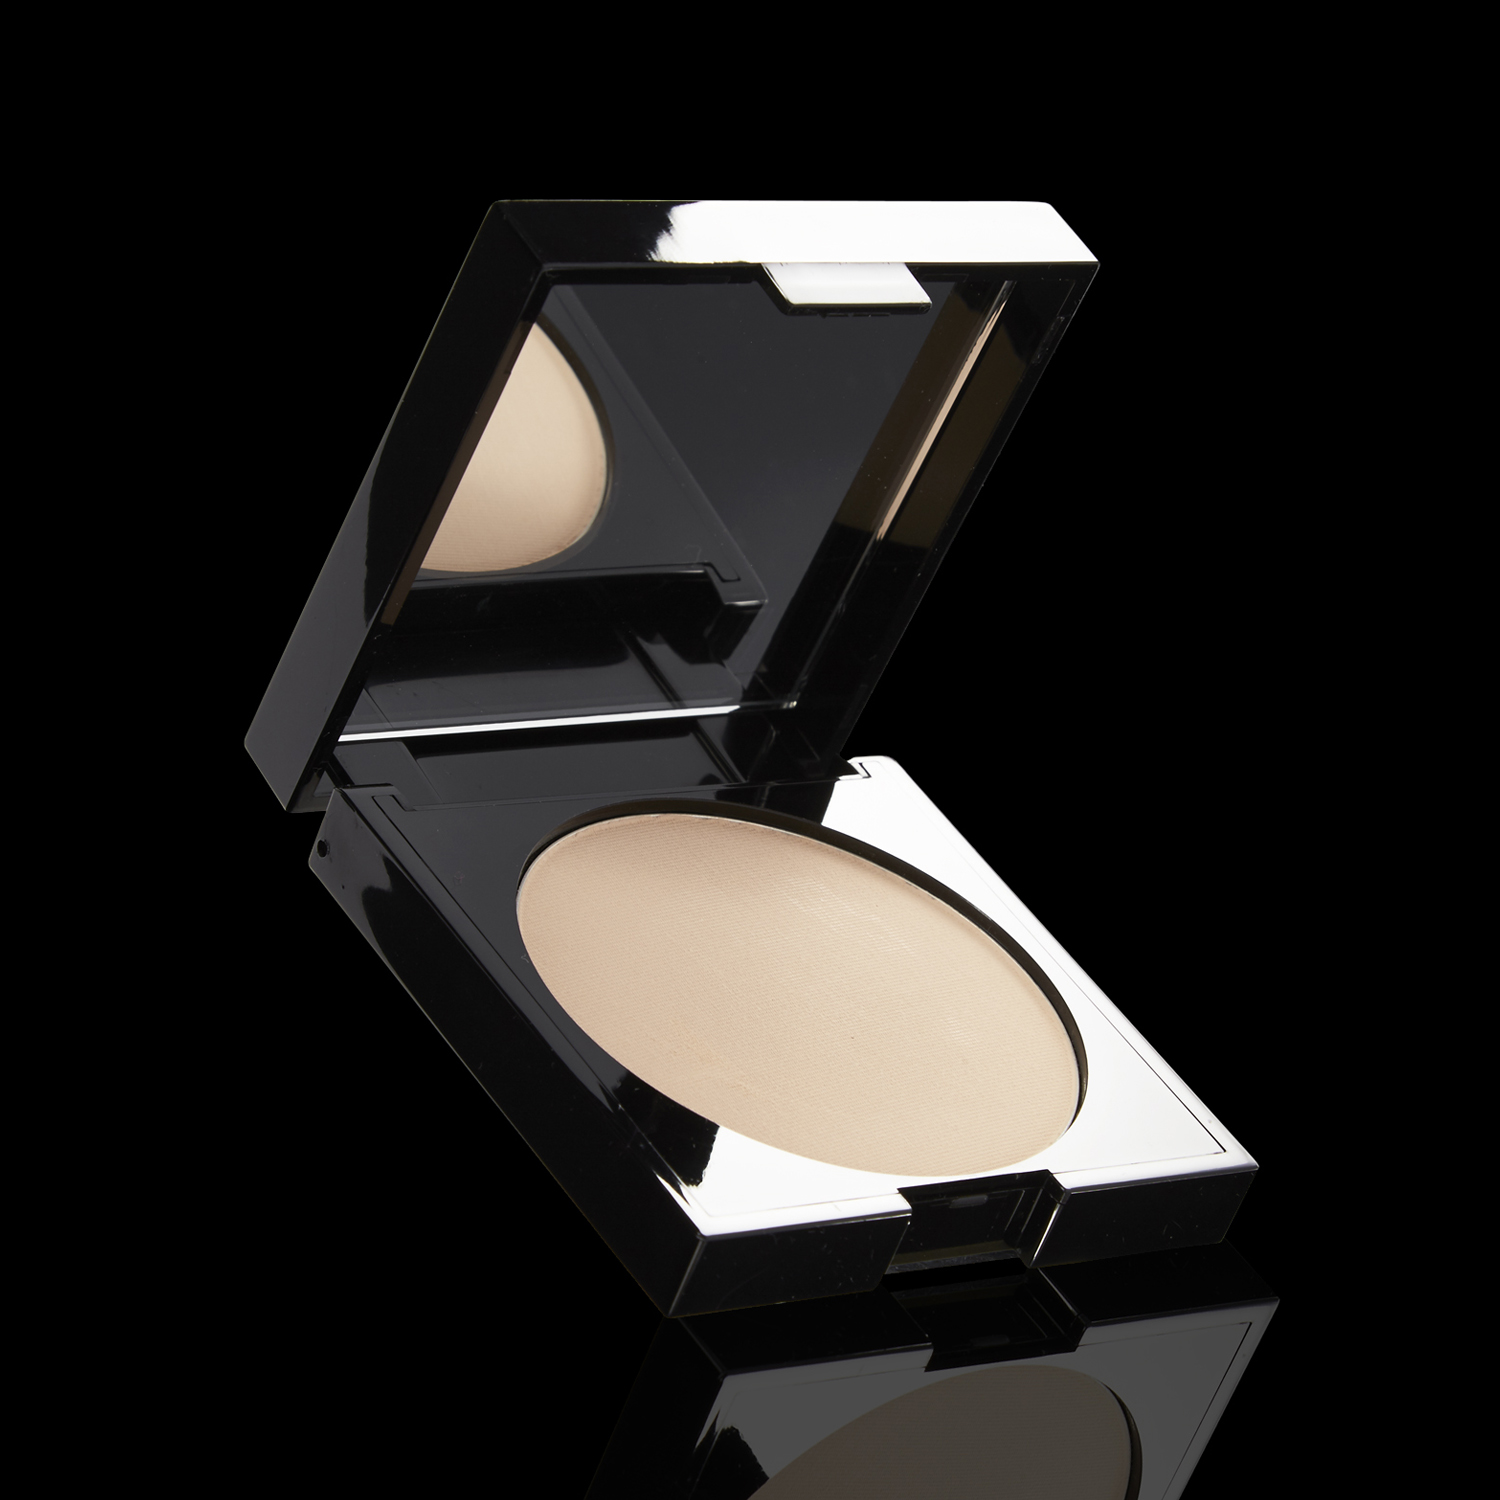 BLAK packaging Mineral Foundation Pressed Powder Compact